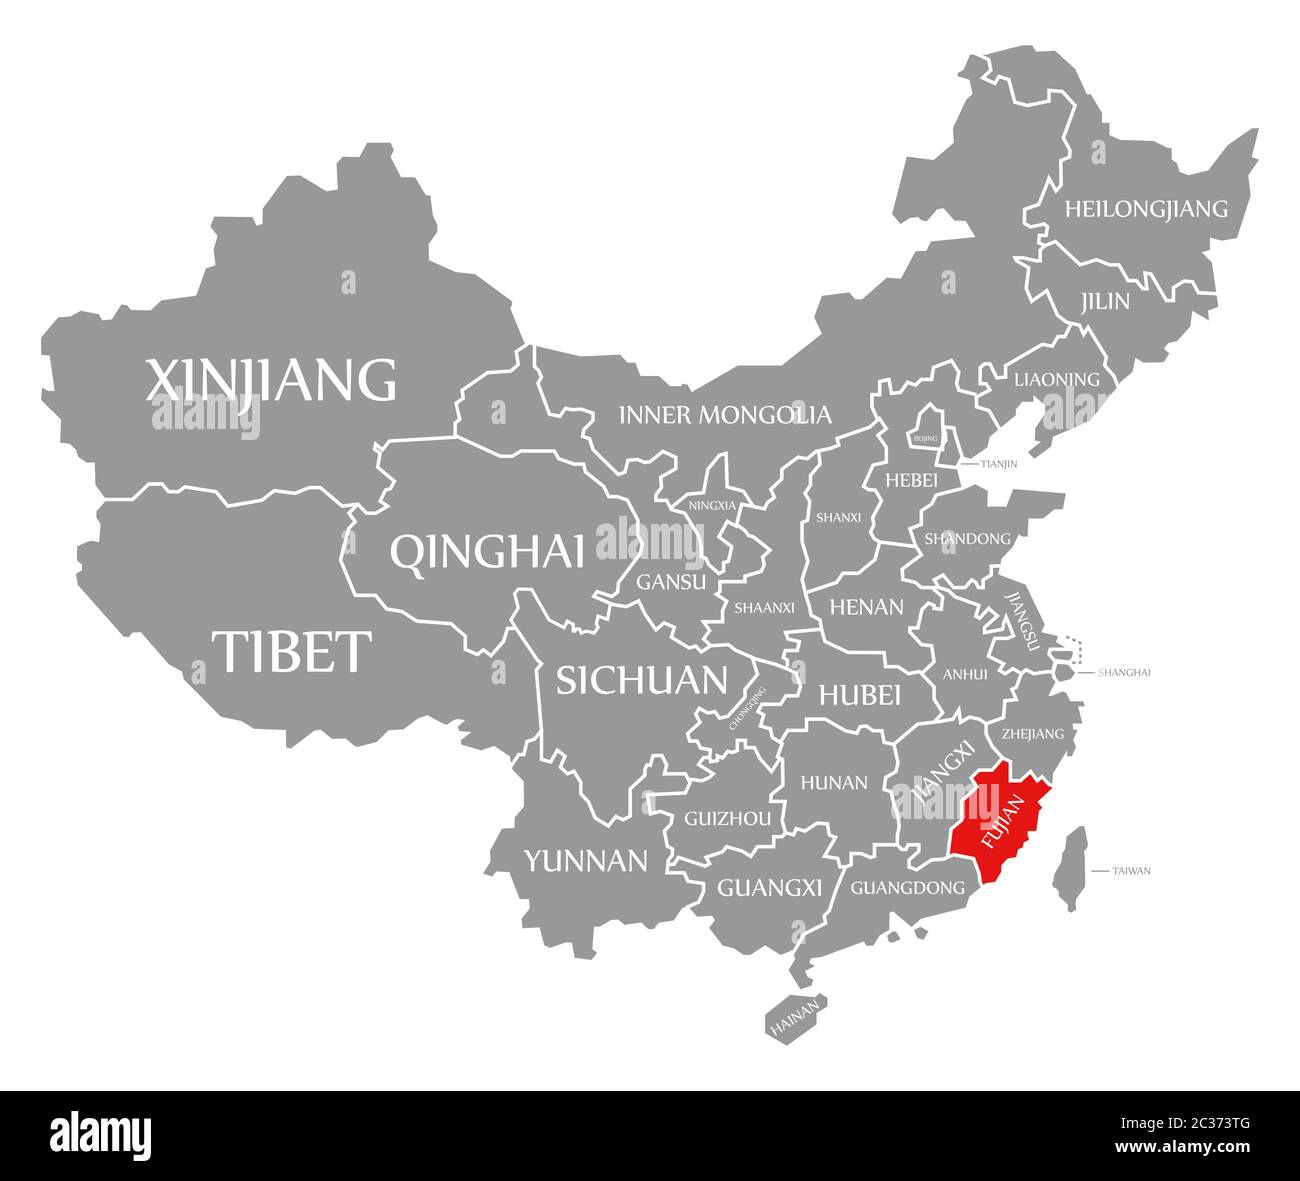 Fujian red highlighted in map of China Stock Photo